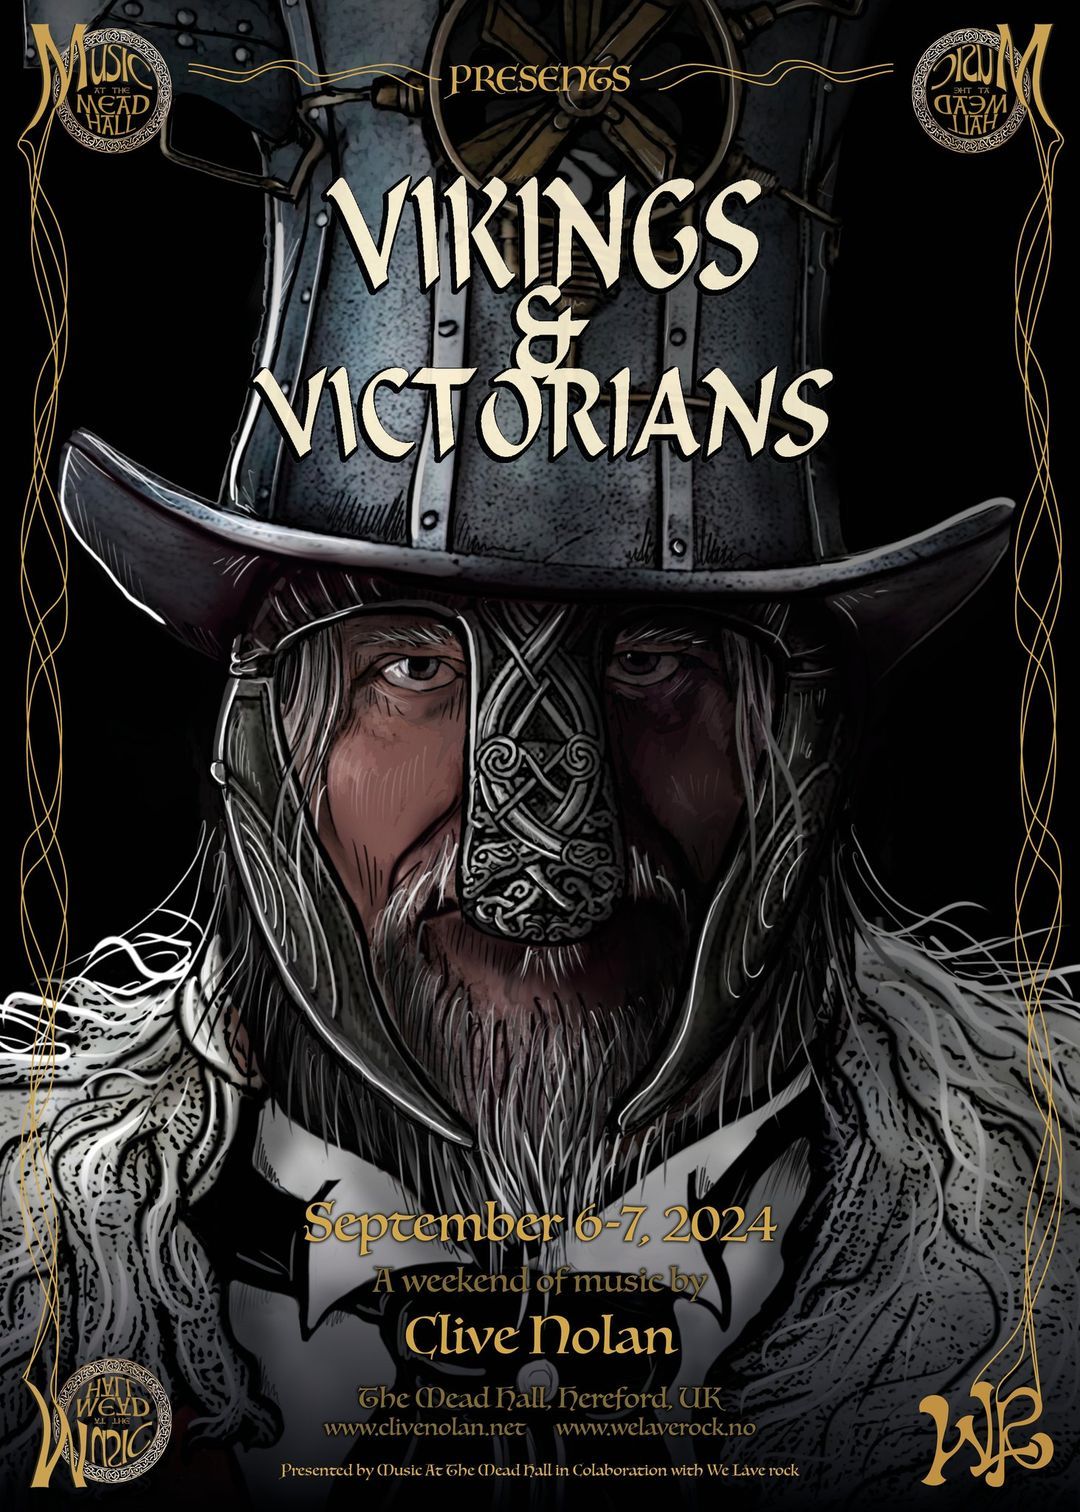 Music At The Mead Hall & We L\u00e5ve Rock Presents "VIKINGS & VICTORIANS"